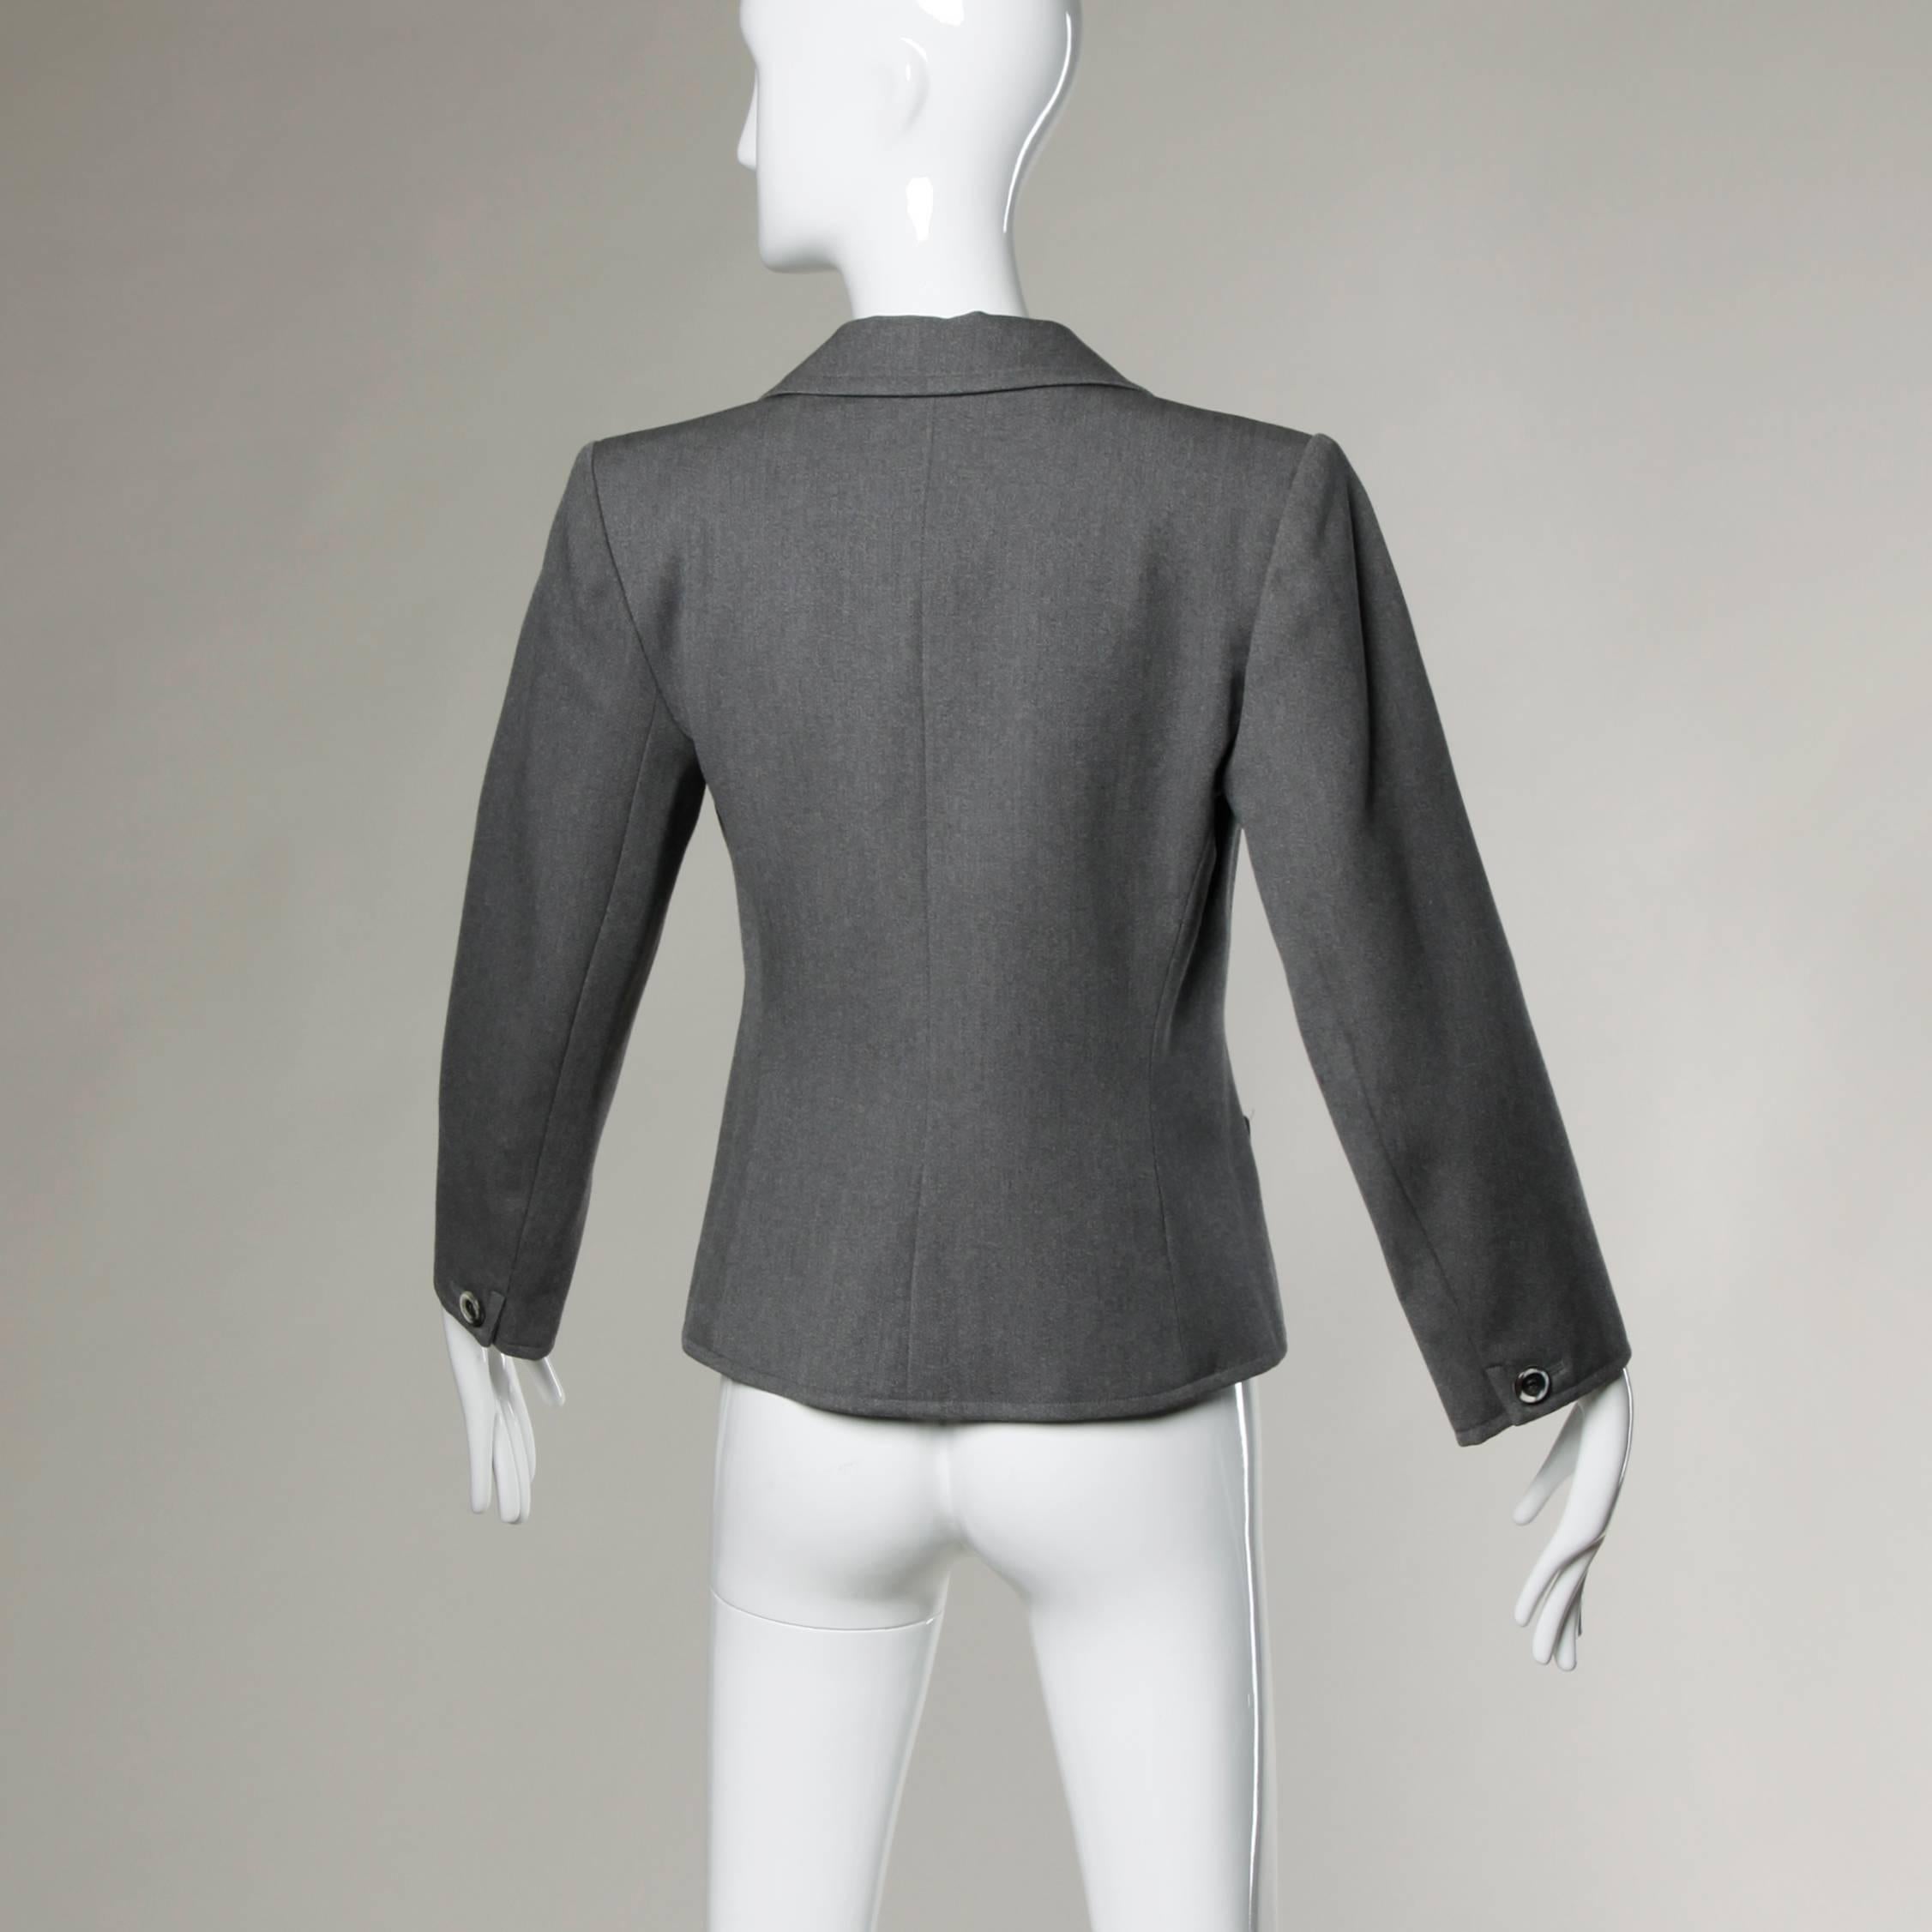 YSL Yves Saint Laurent Rive Gauche Vintage Gray Wool Blazer Jacket In Excellent Condition For Sale In Sparks, NV